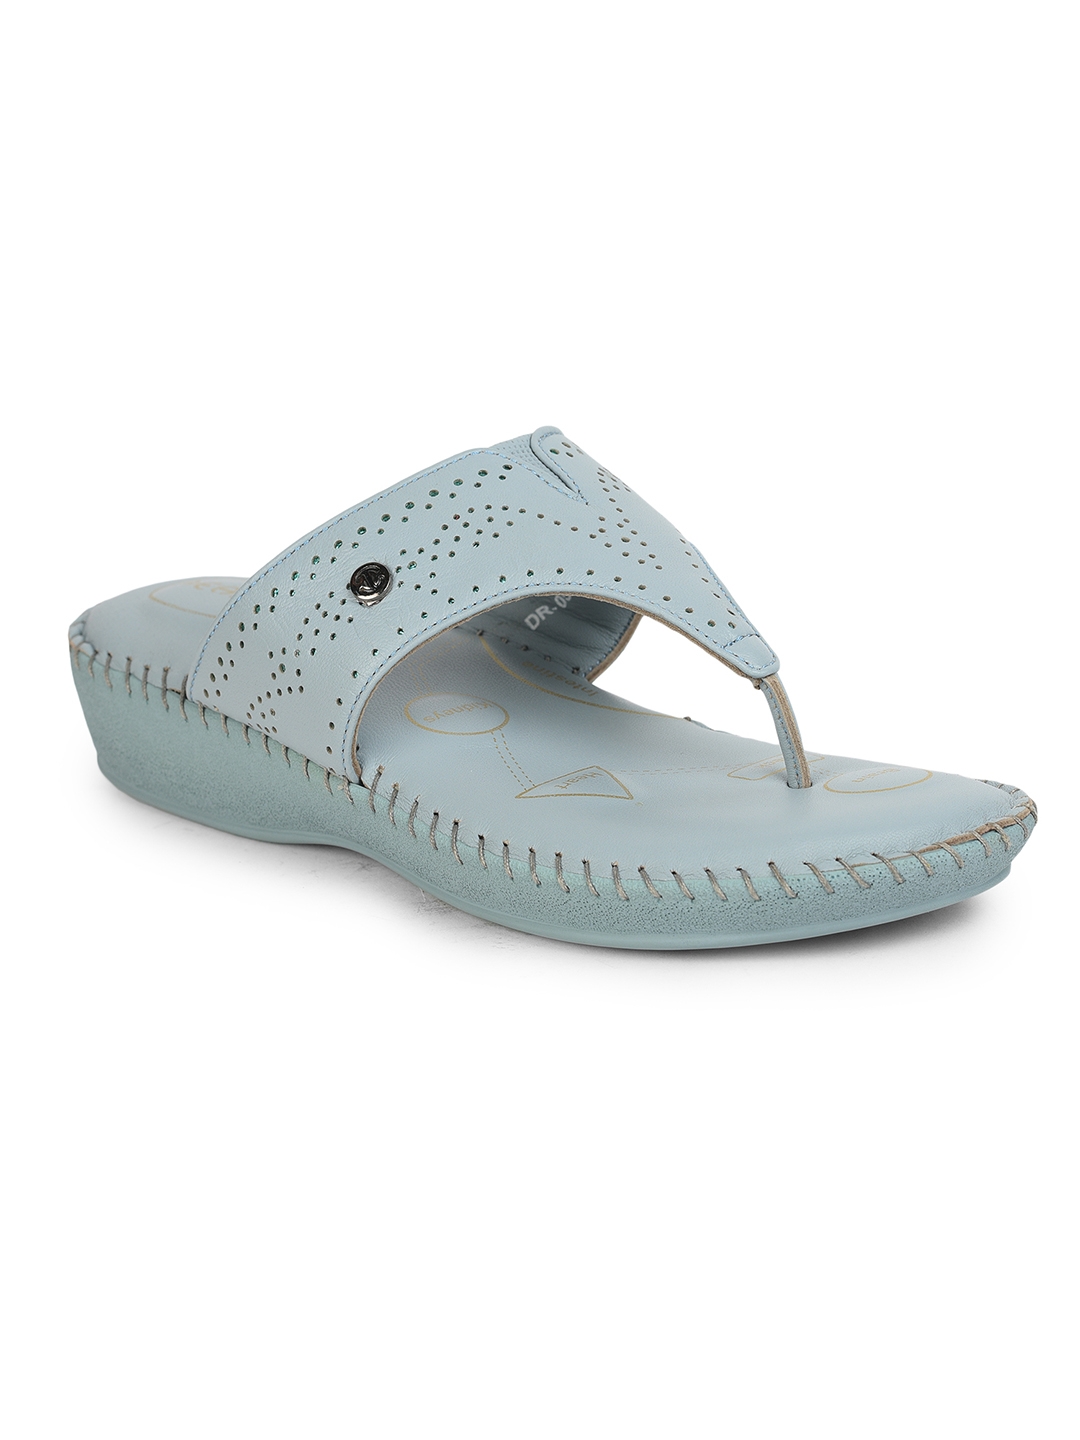 Liberty | Healers by Liberty Blue Flip Flops DR-0593 For :- Women